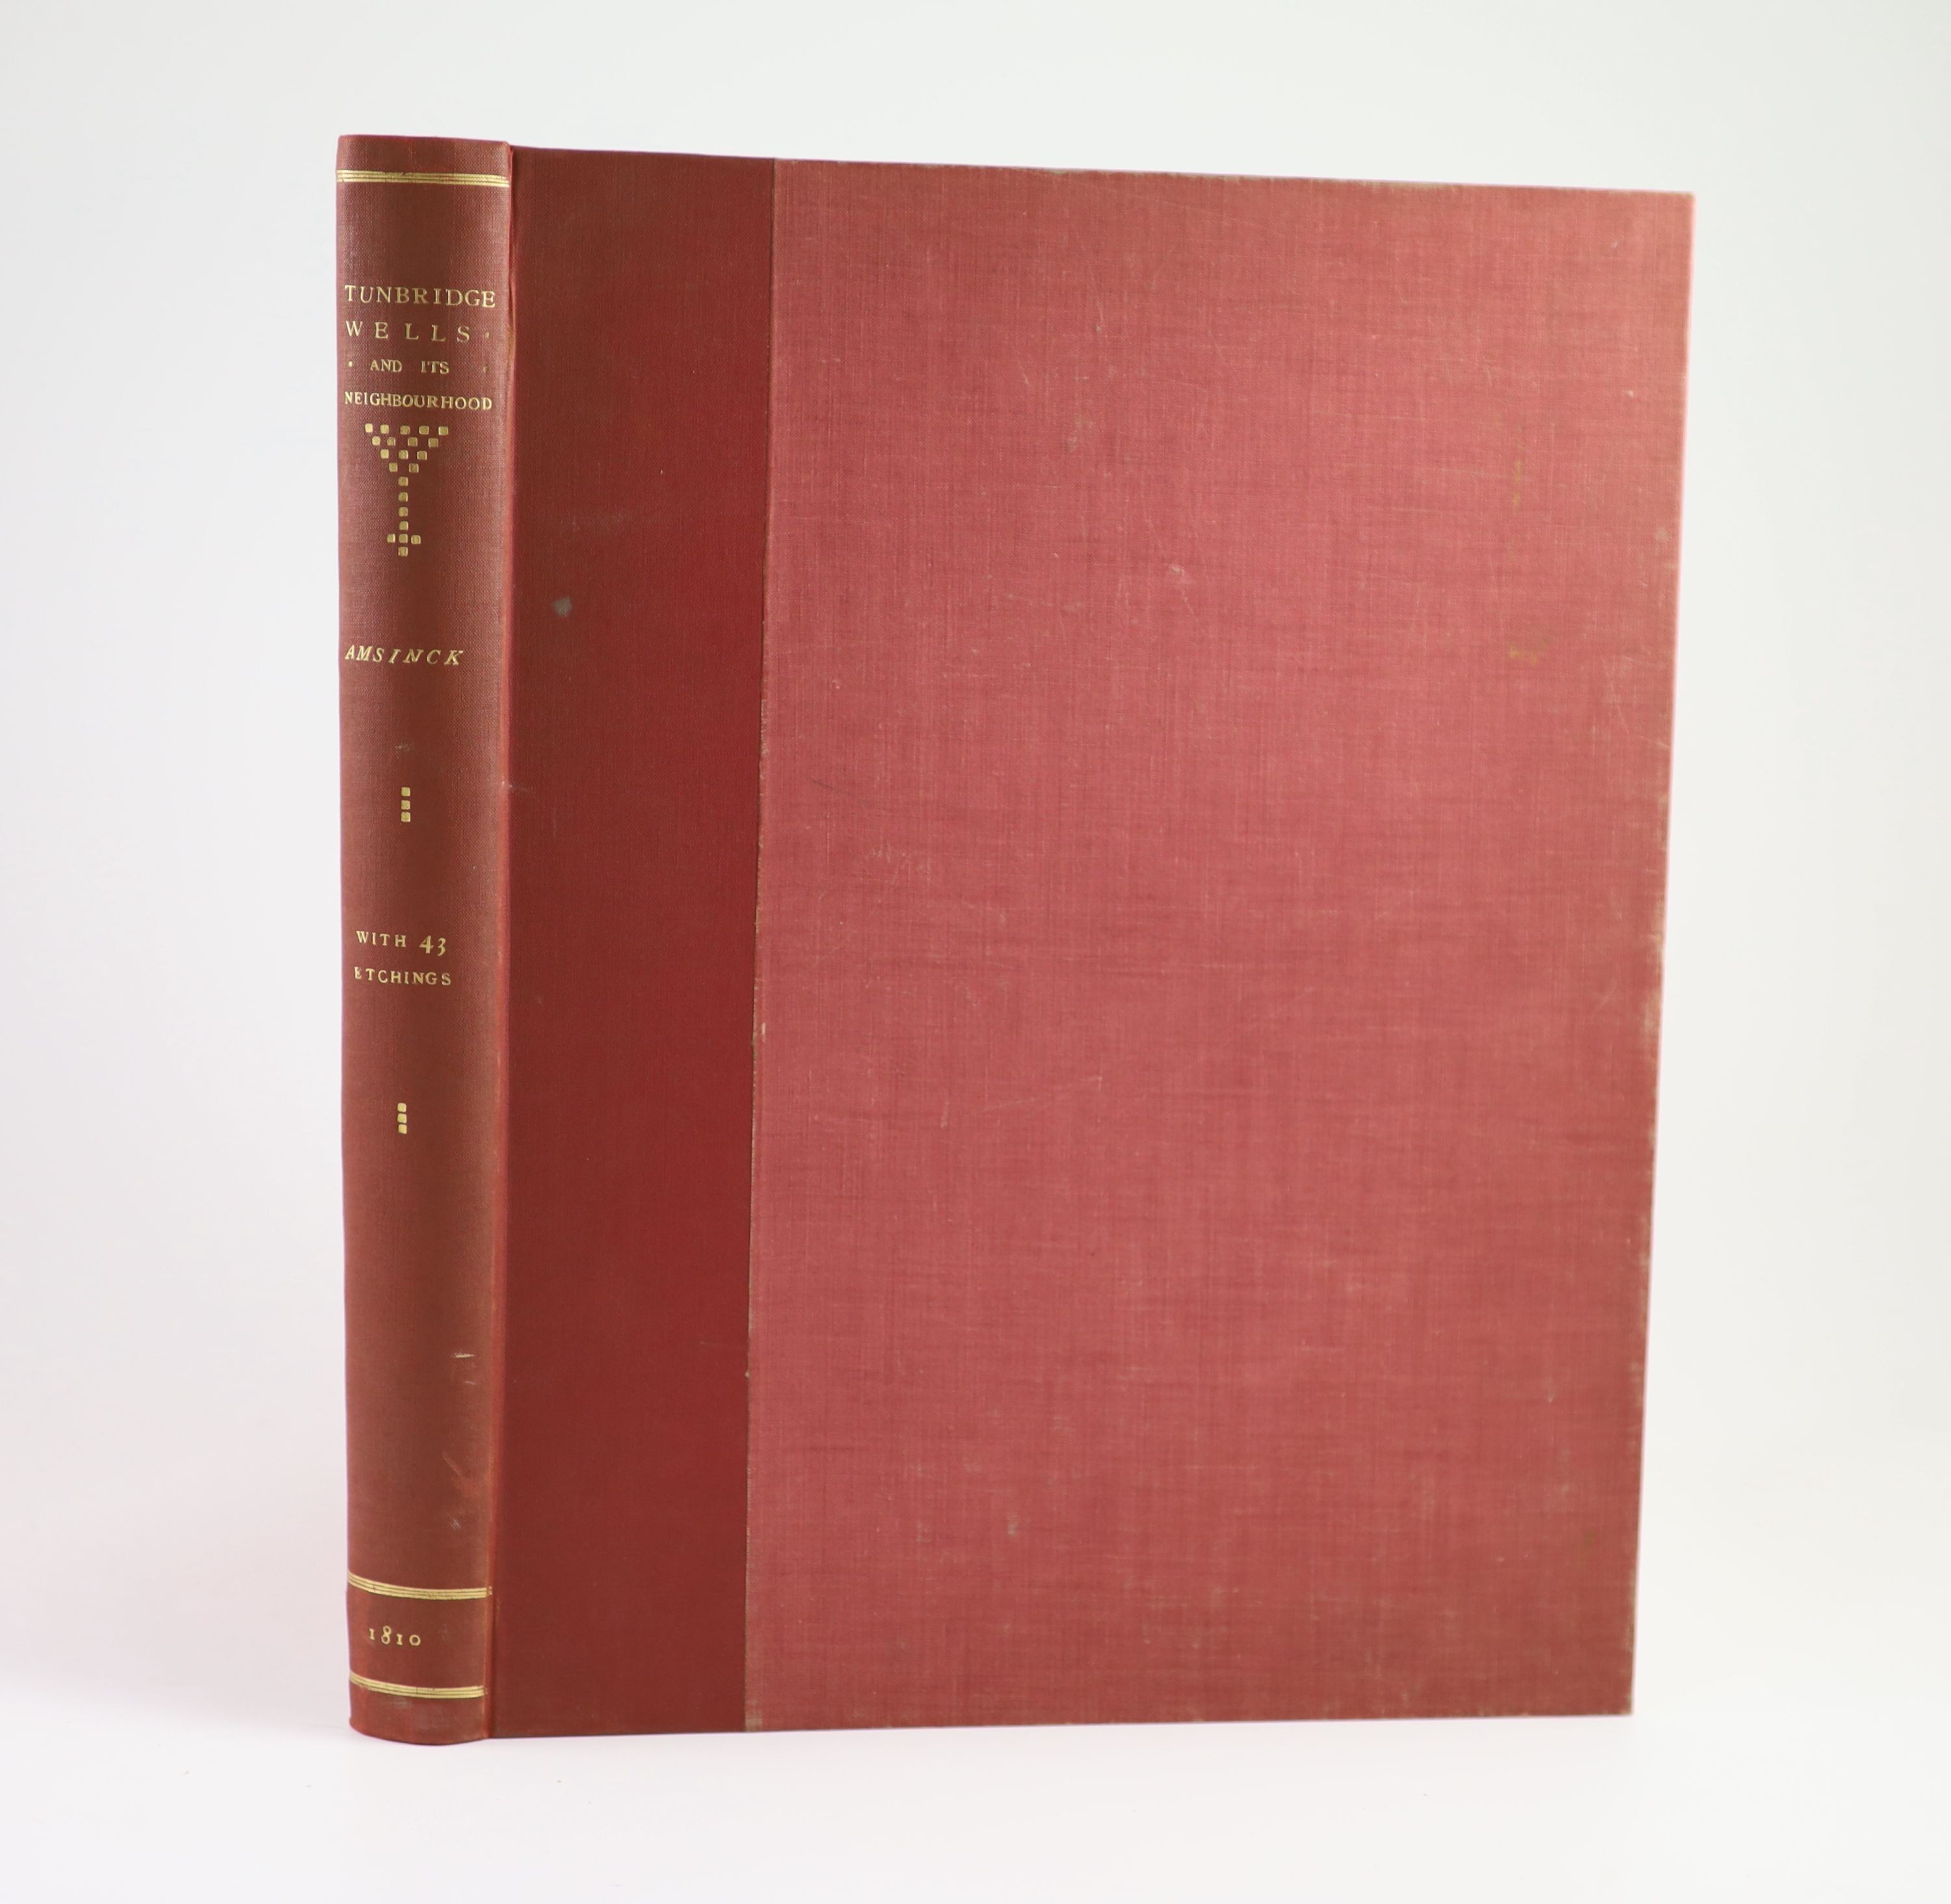 Amsinck, Paul - Tunbridge Wells, and its Neighourhood, qto, later red cloth, with frontis and 31 plates, text and plates browned, William Miller, London, 1810